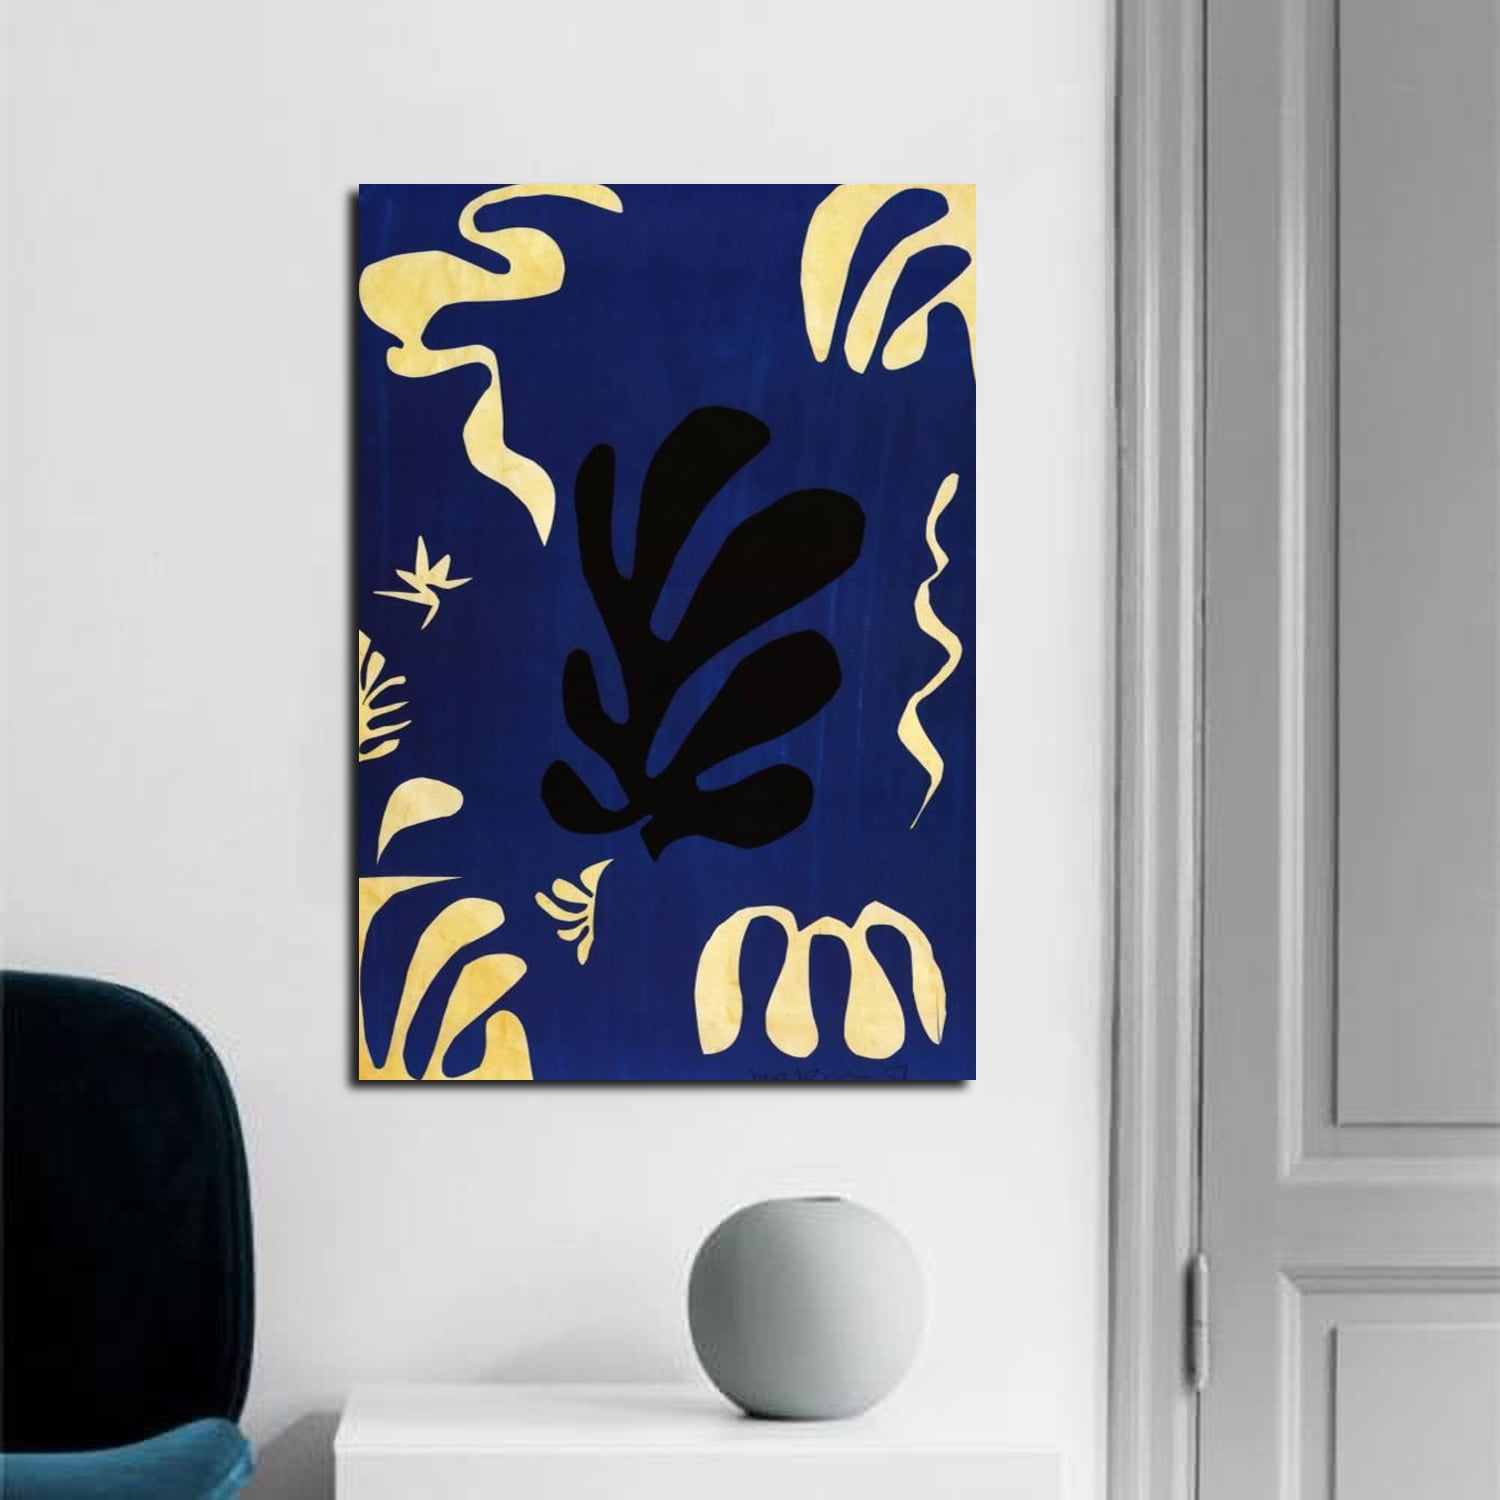 Number Painting for Adults Woa Image Painting by Henri Matisse Arts Craft  for Home Wall Decor